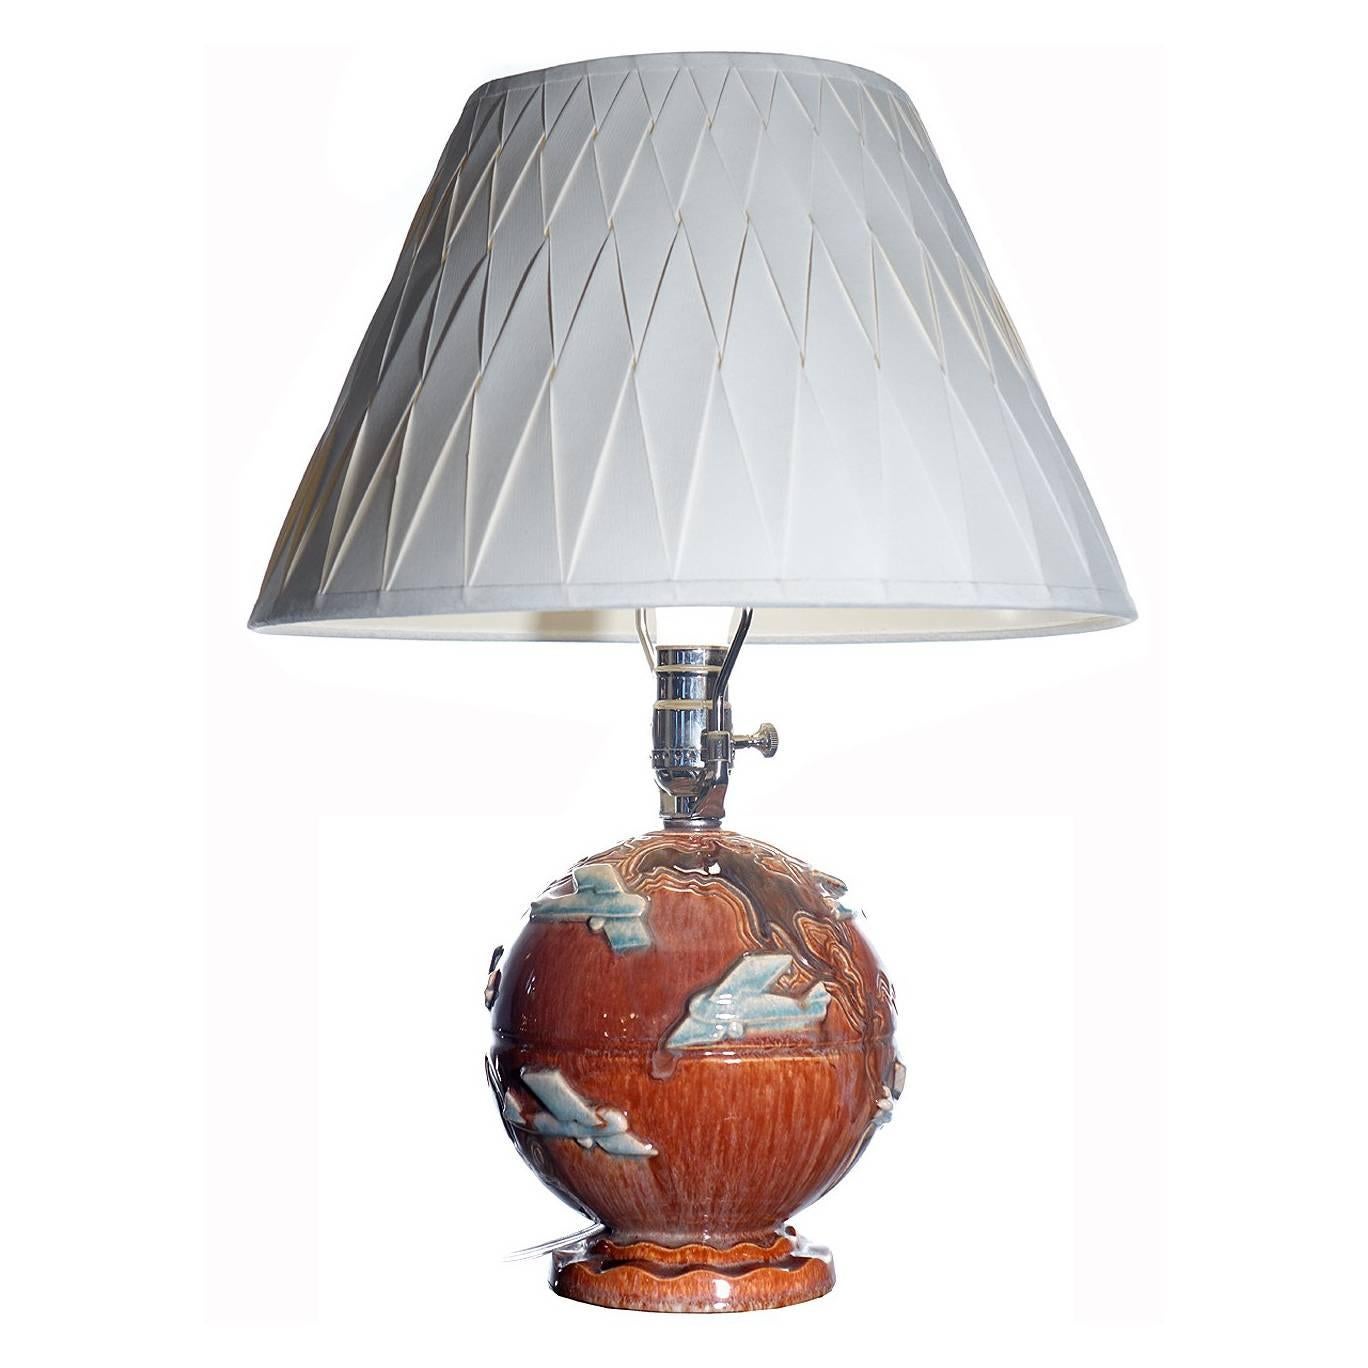 French Art Deco Airplane Globe Table Lamp